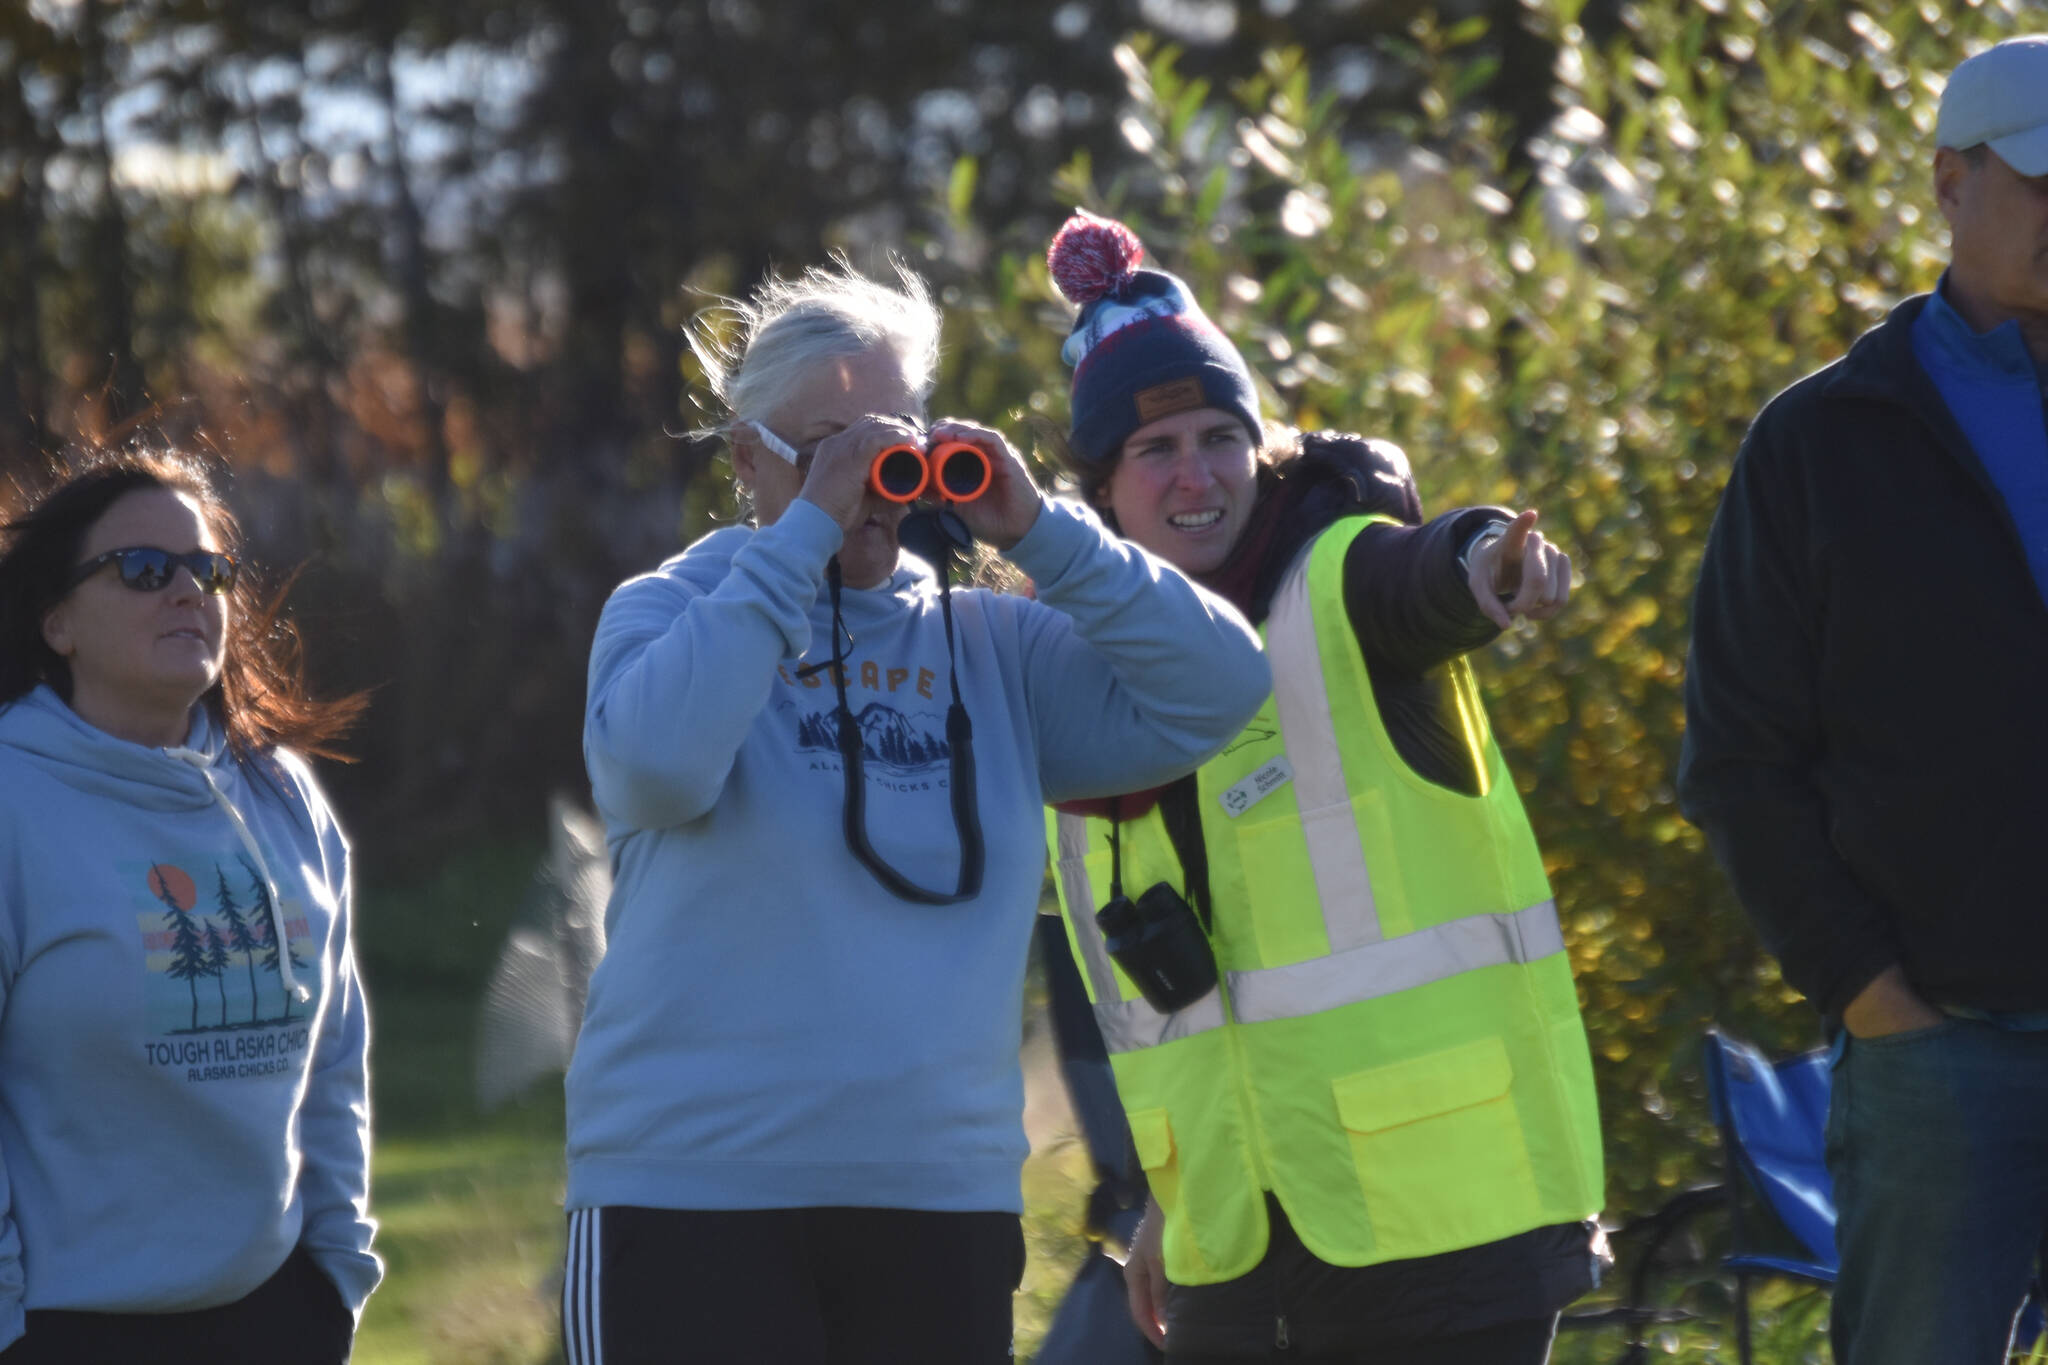 Nicole Schmitt (in yellow), director of the Alaska Wildlife Alliance, points out belugas for attendees of Belugas Count! on Saturday, Sept. 17, 2022, in Kenai, Alaska. (Jake Dye/Peninsula Clarion)